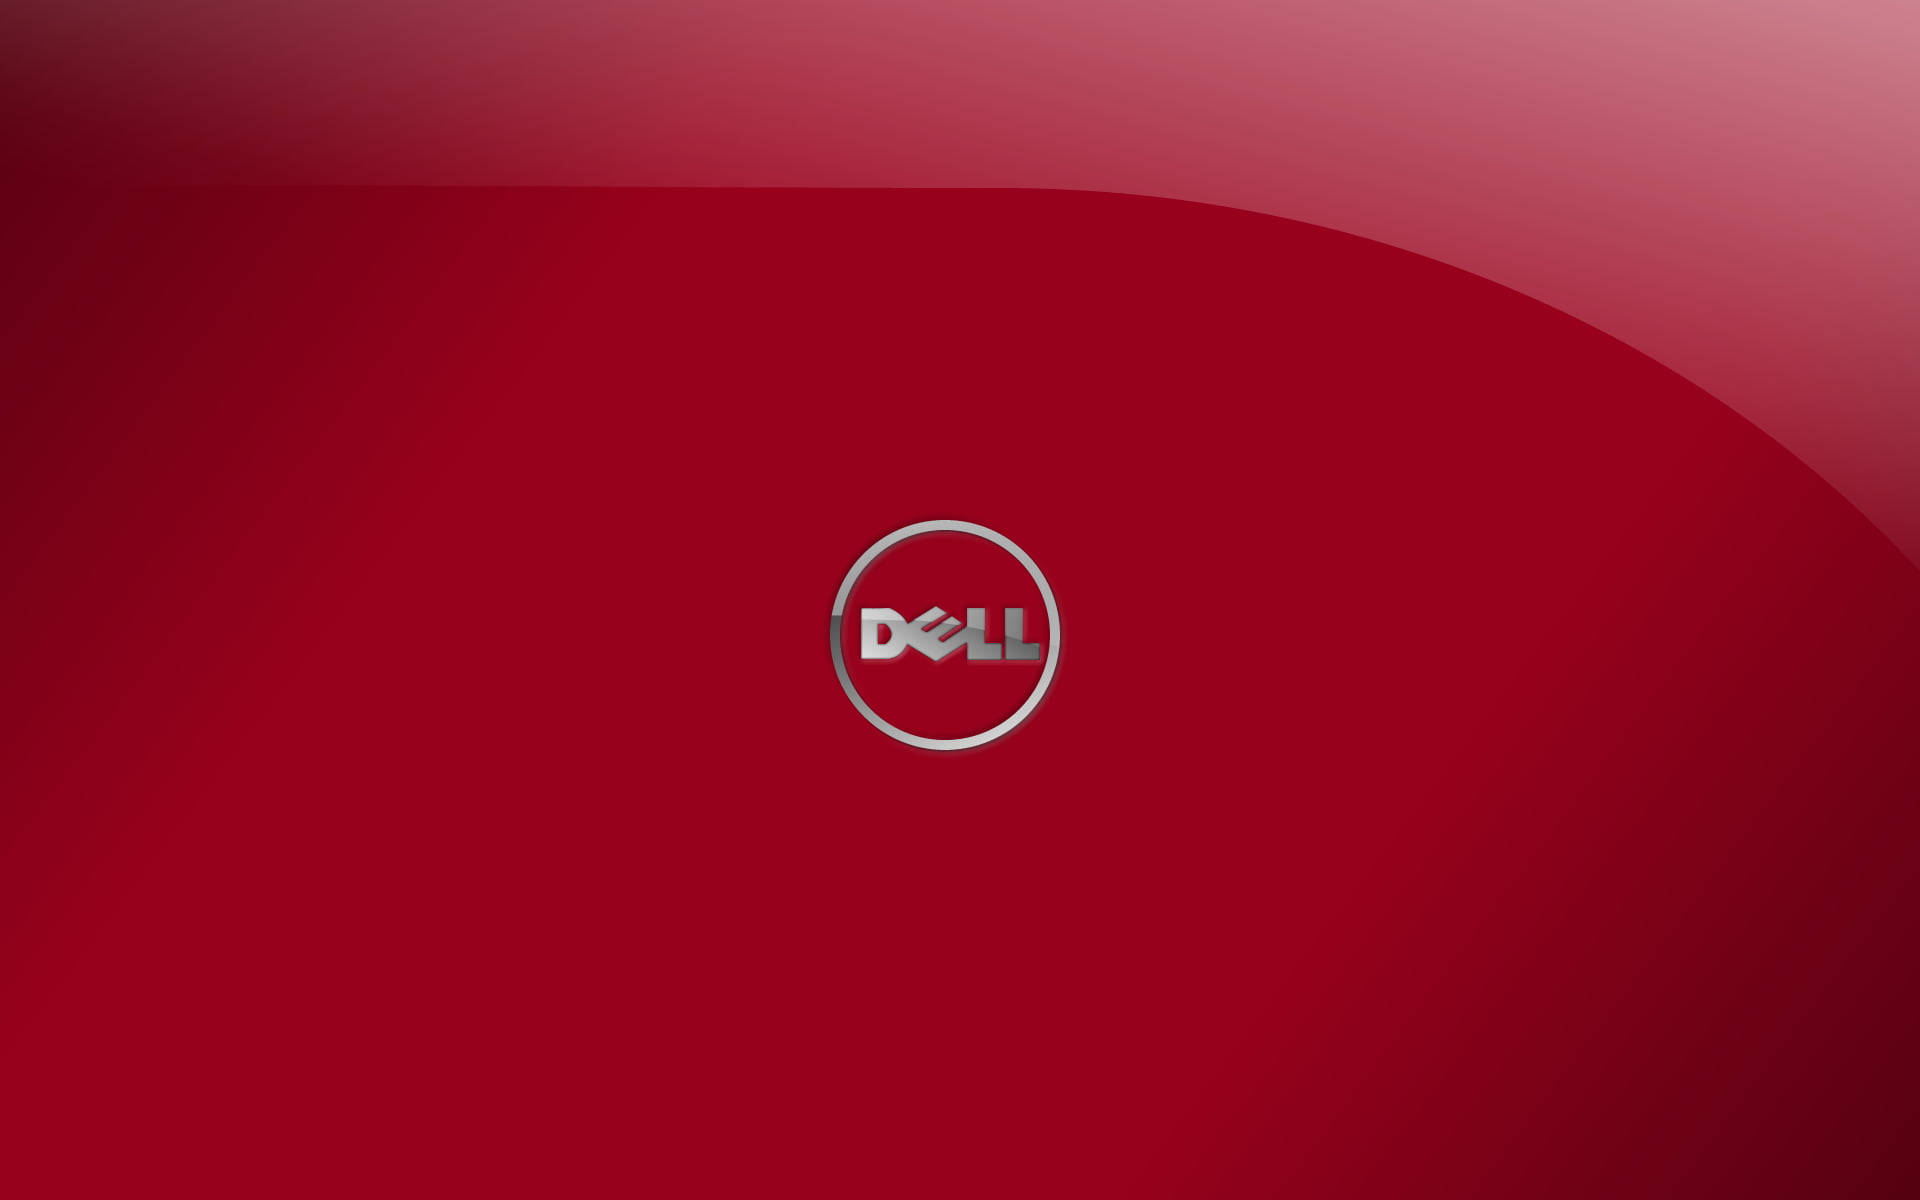 Silver Dell Laptop Logo On Red Background